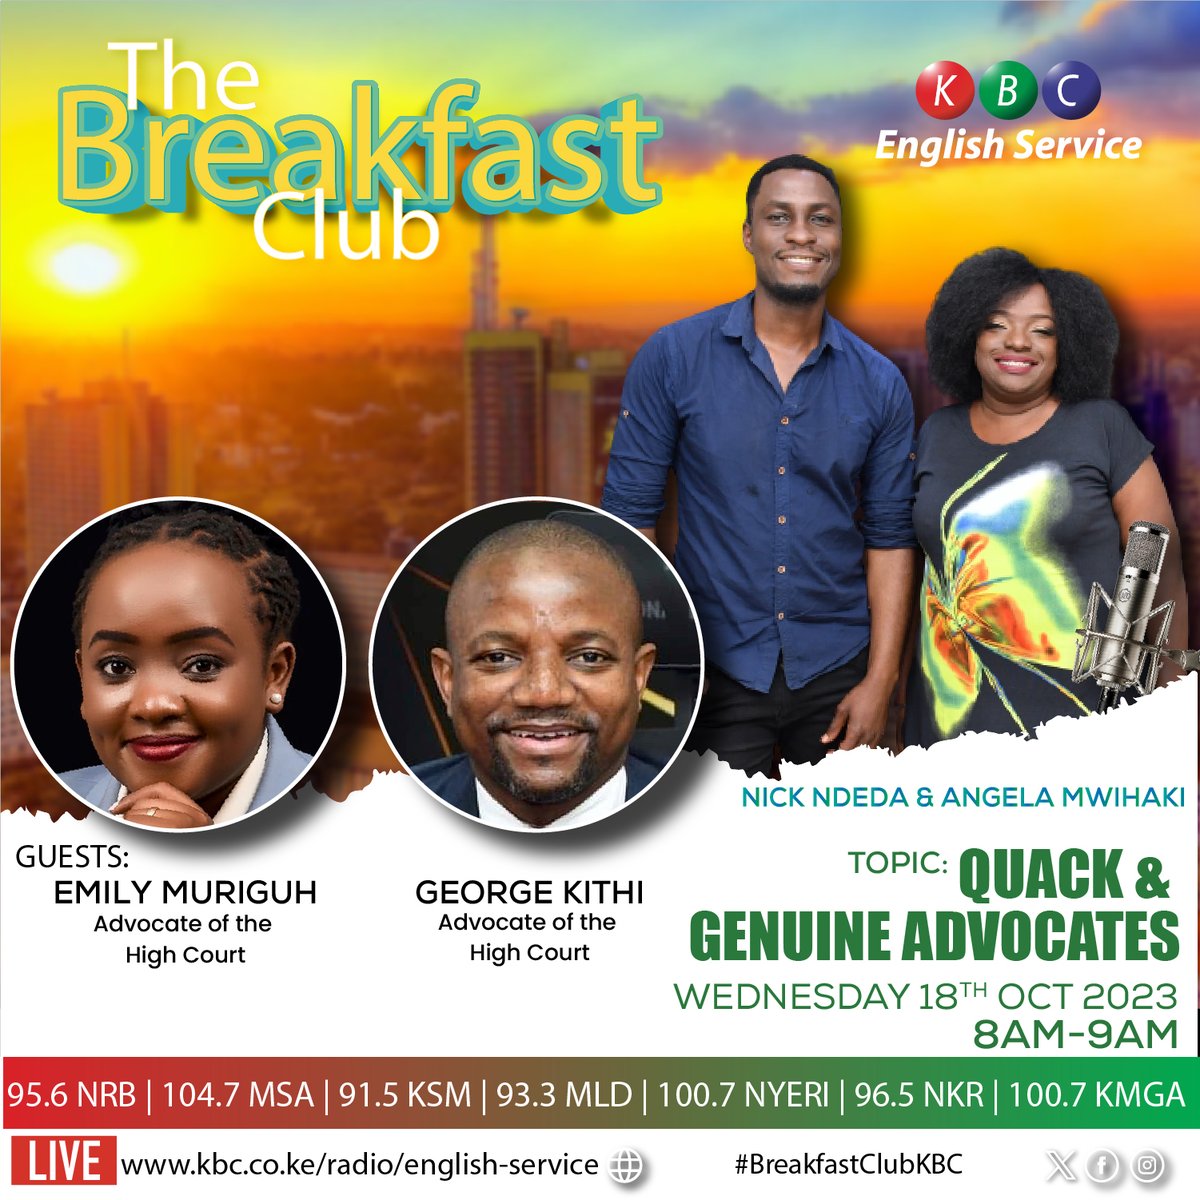 'The most important thing is to try and inspire people so that they can be great in whatever they want to do.' GOOD MORNING! @NickNdeda @angelamwihaki Listen live: kbc.co.ke/radio ^PMN #BreakfastClubKBC